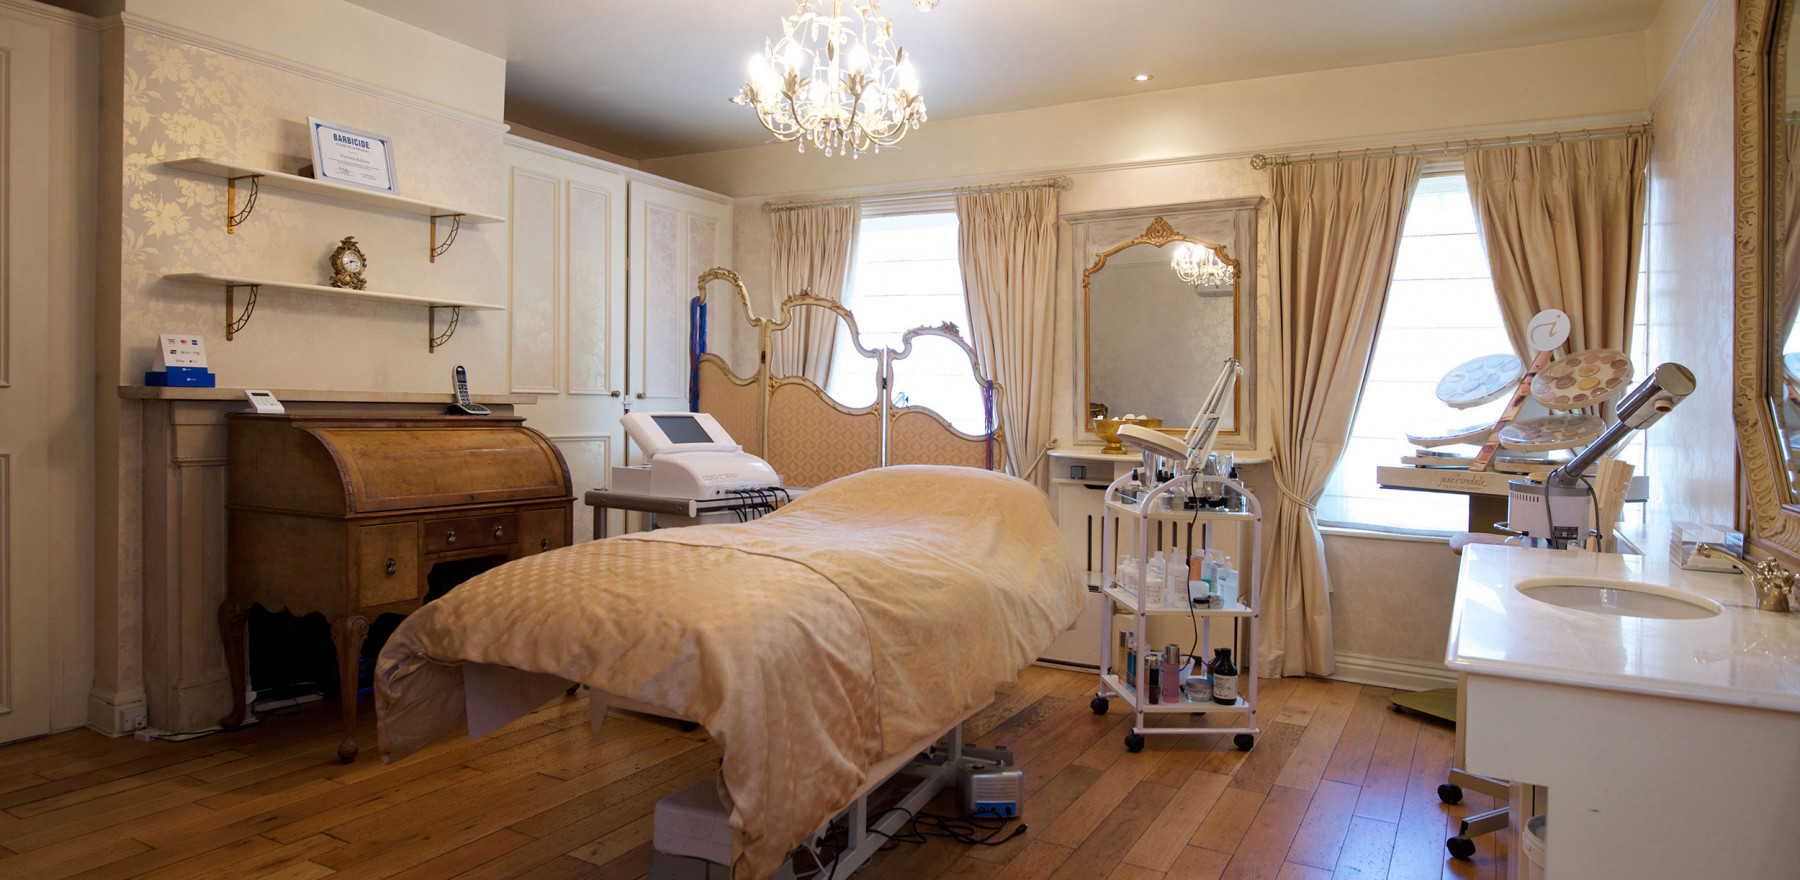 Professional beauty therapy and makeup in Guildford, Surrey.